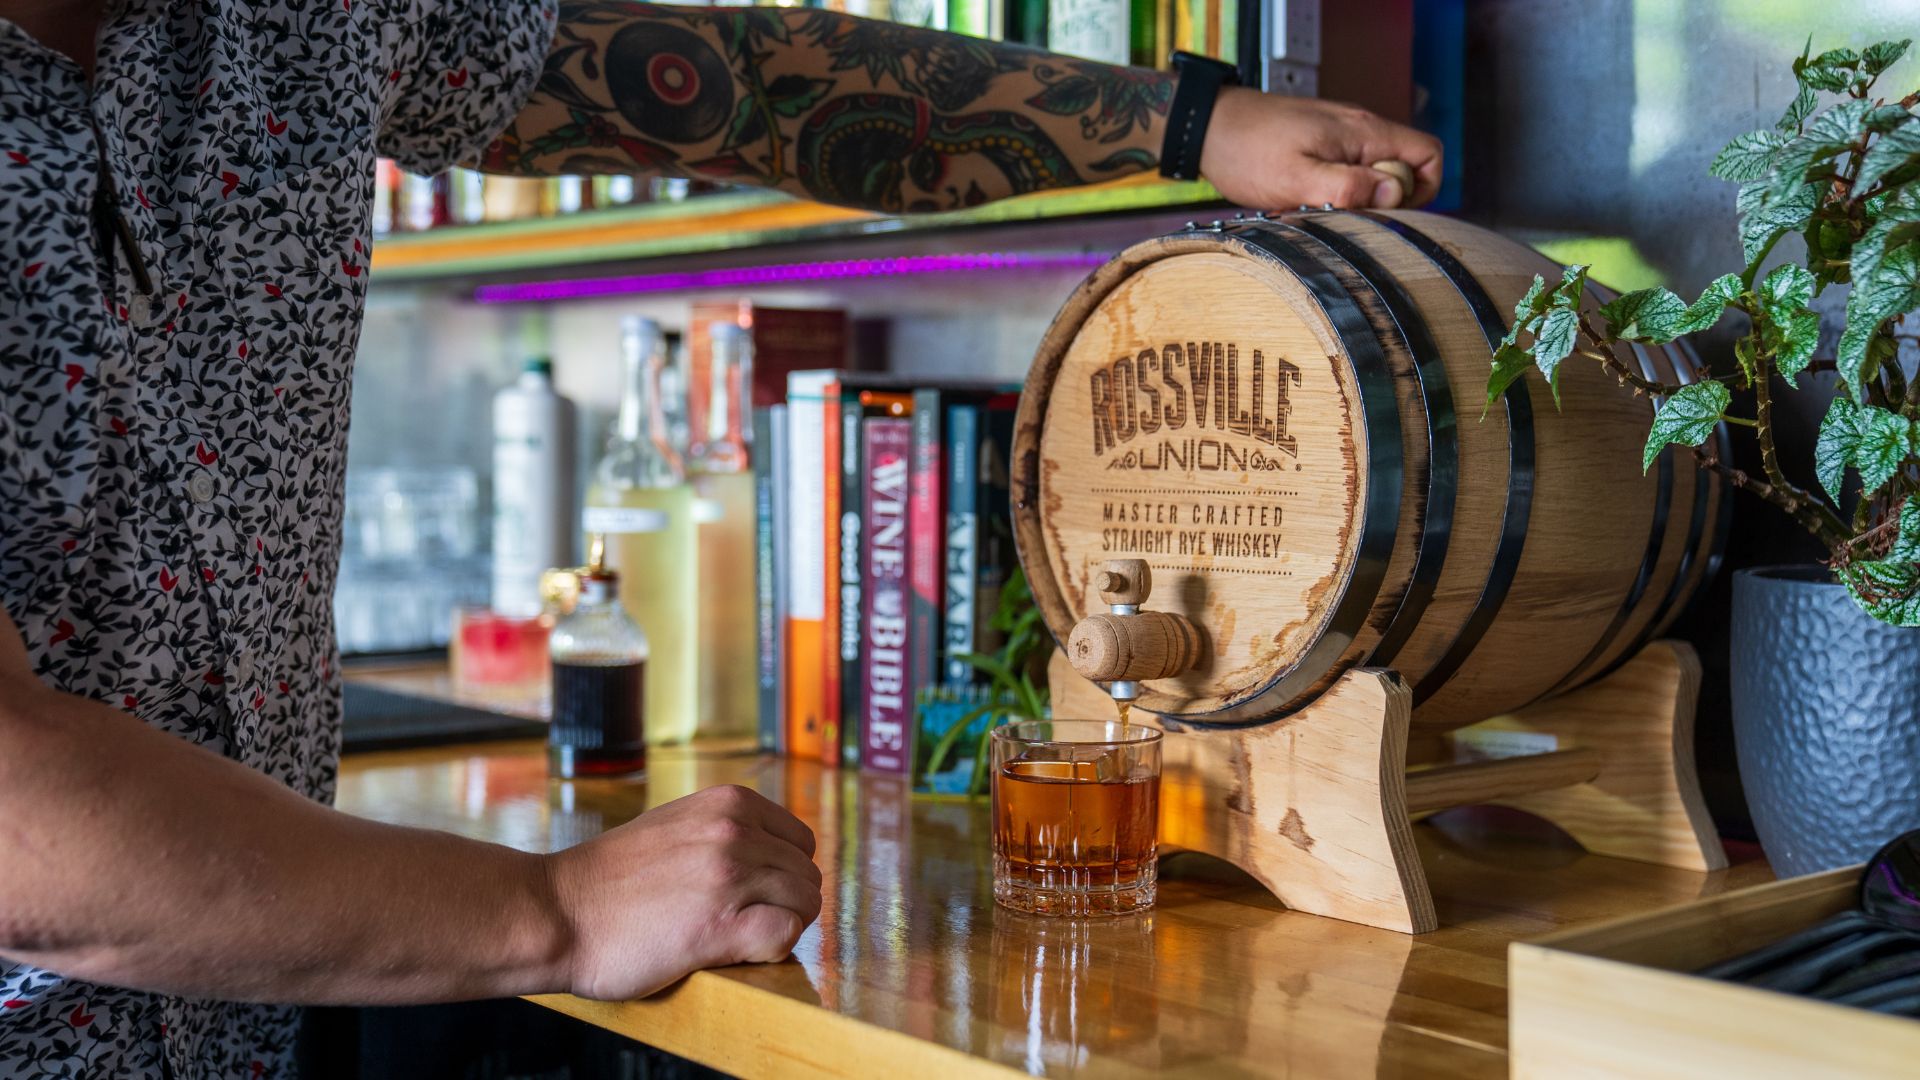 The Lucky Accomplice serves straight rye whiskey from a miniature barrel.